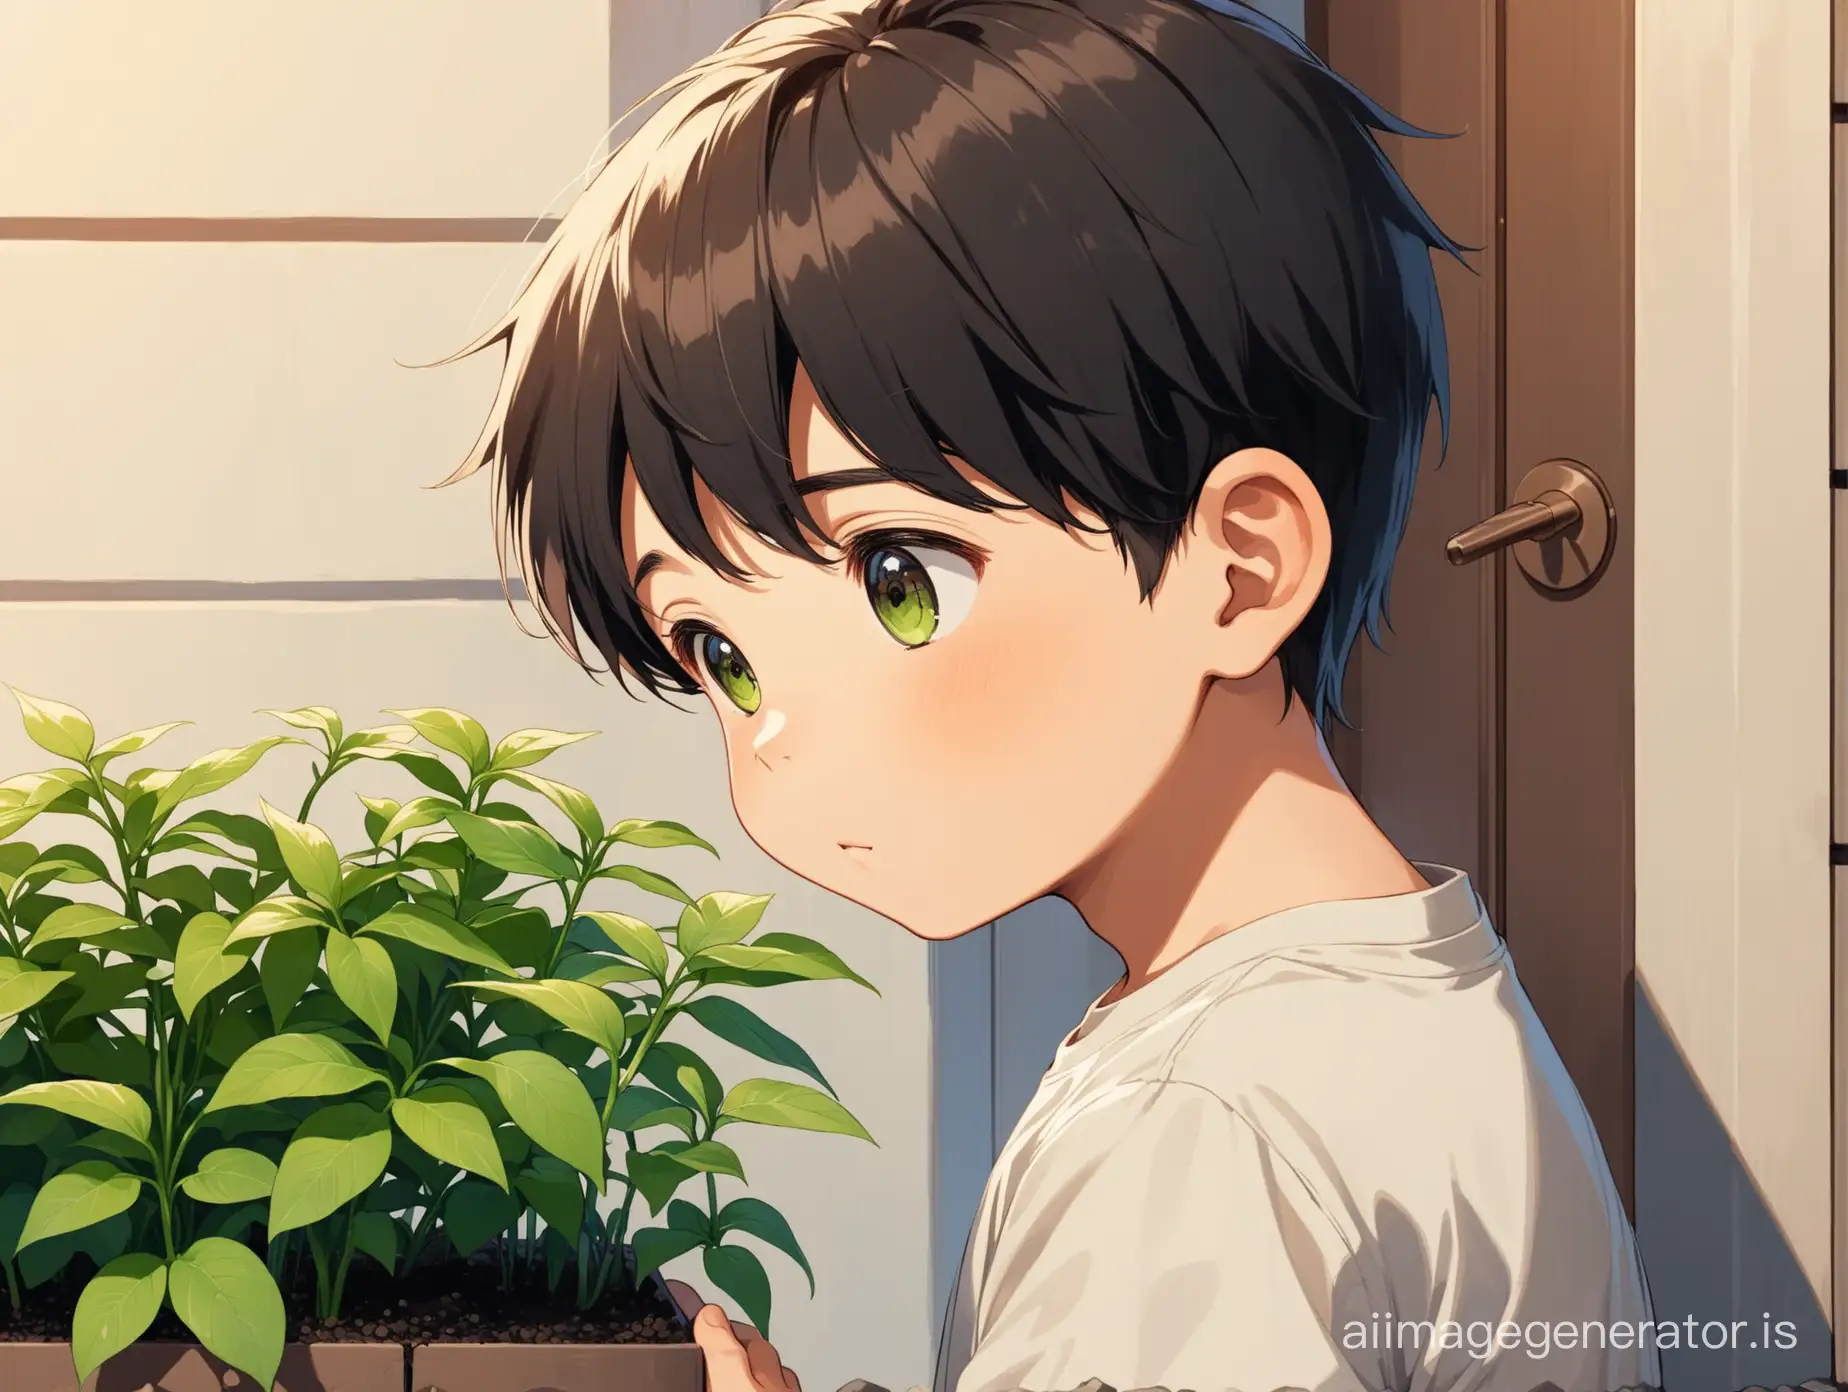 the young boy WATCHING A SMALL PLANT PLANTED OUTSIDE THE HOUSE